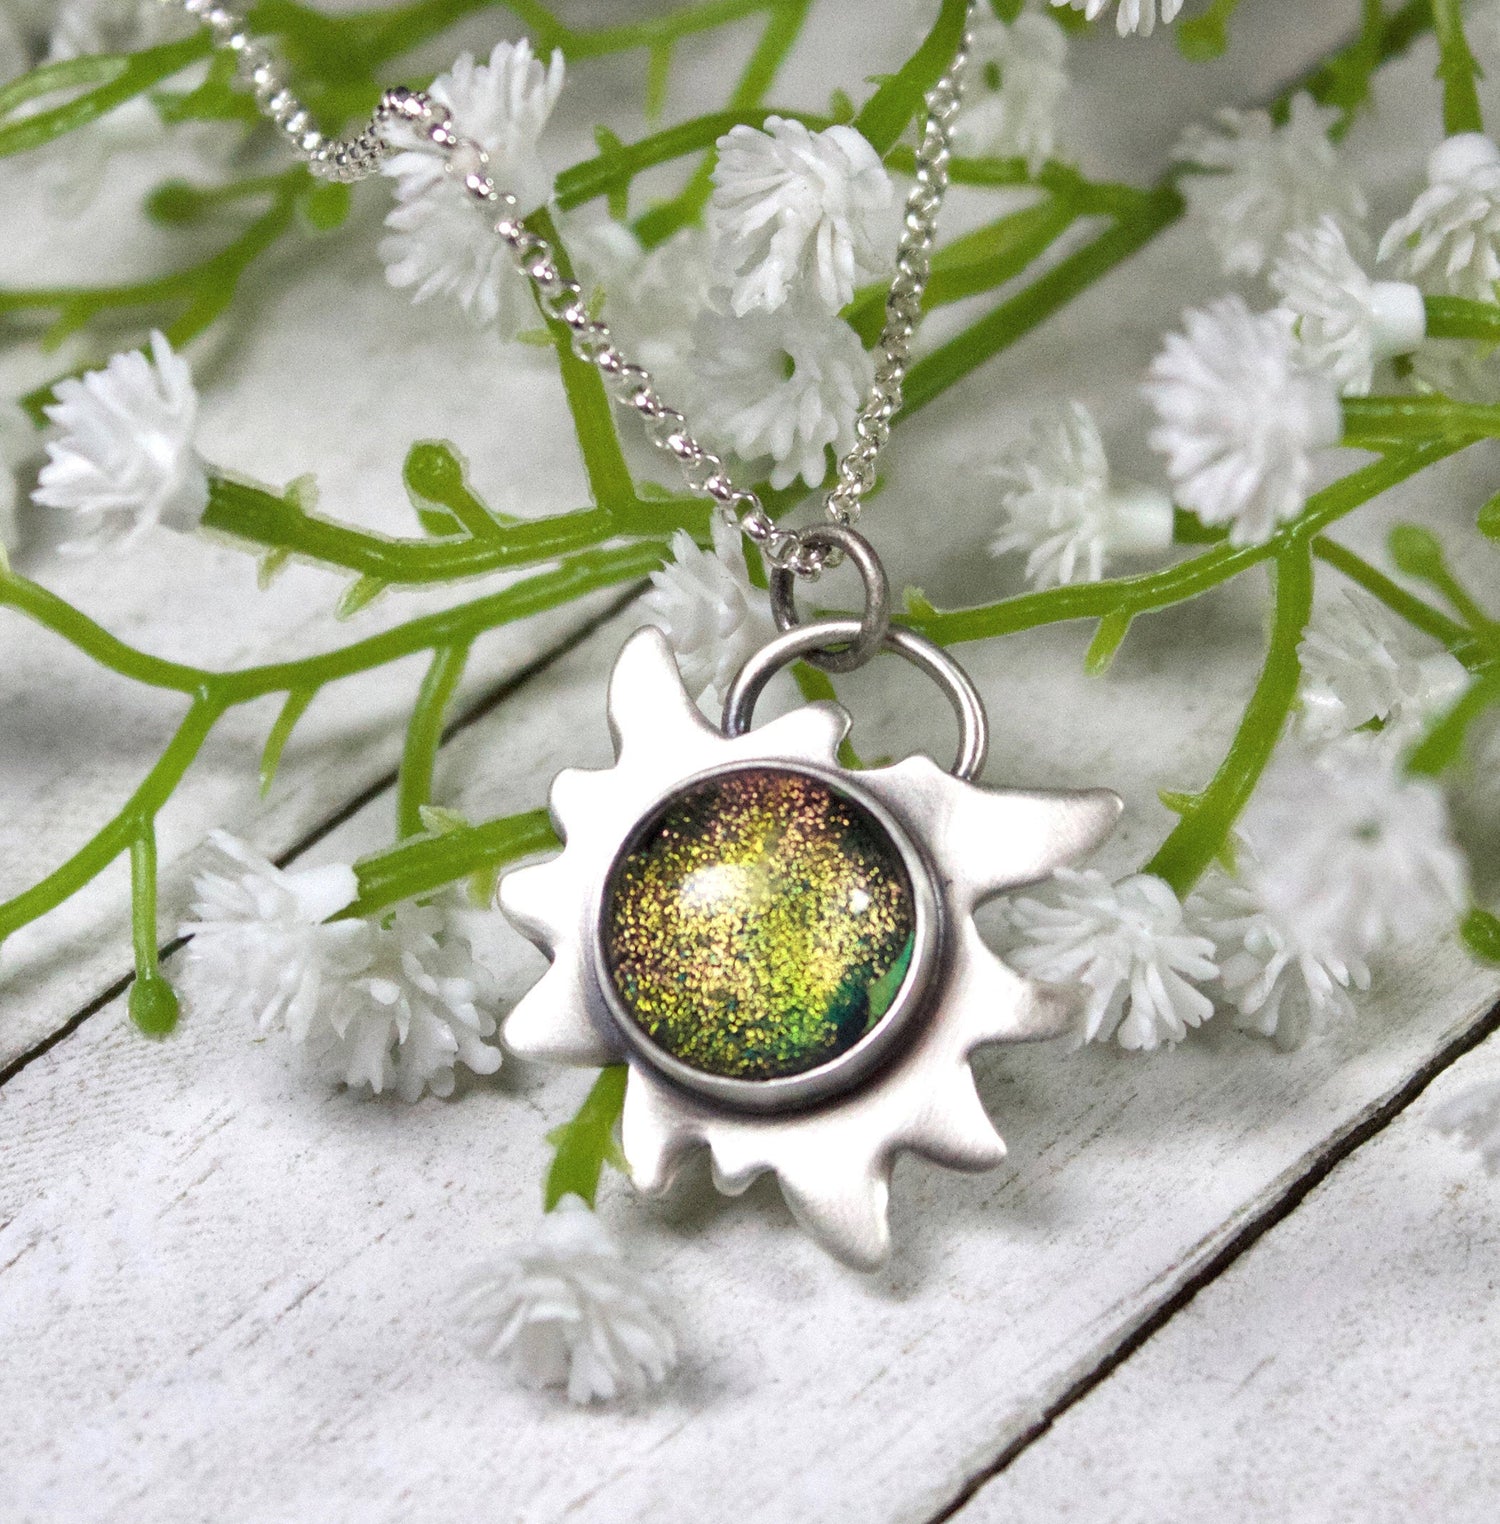 Edelweiss Flower Glass Stone Galaxy PendantEdelweiss Flower Glass Stone Galaxy Pendant. This a one inch wide pendant made in sterling silver. The center is dichroic glass with sparkling bits in a golden color. The silver is shoped like an edelweiss flower. The sterling silver pendant comes on a rolo chain.